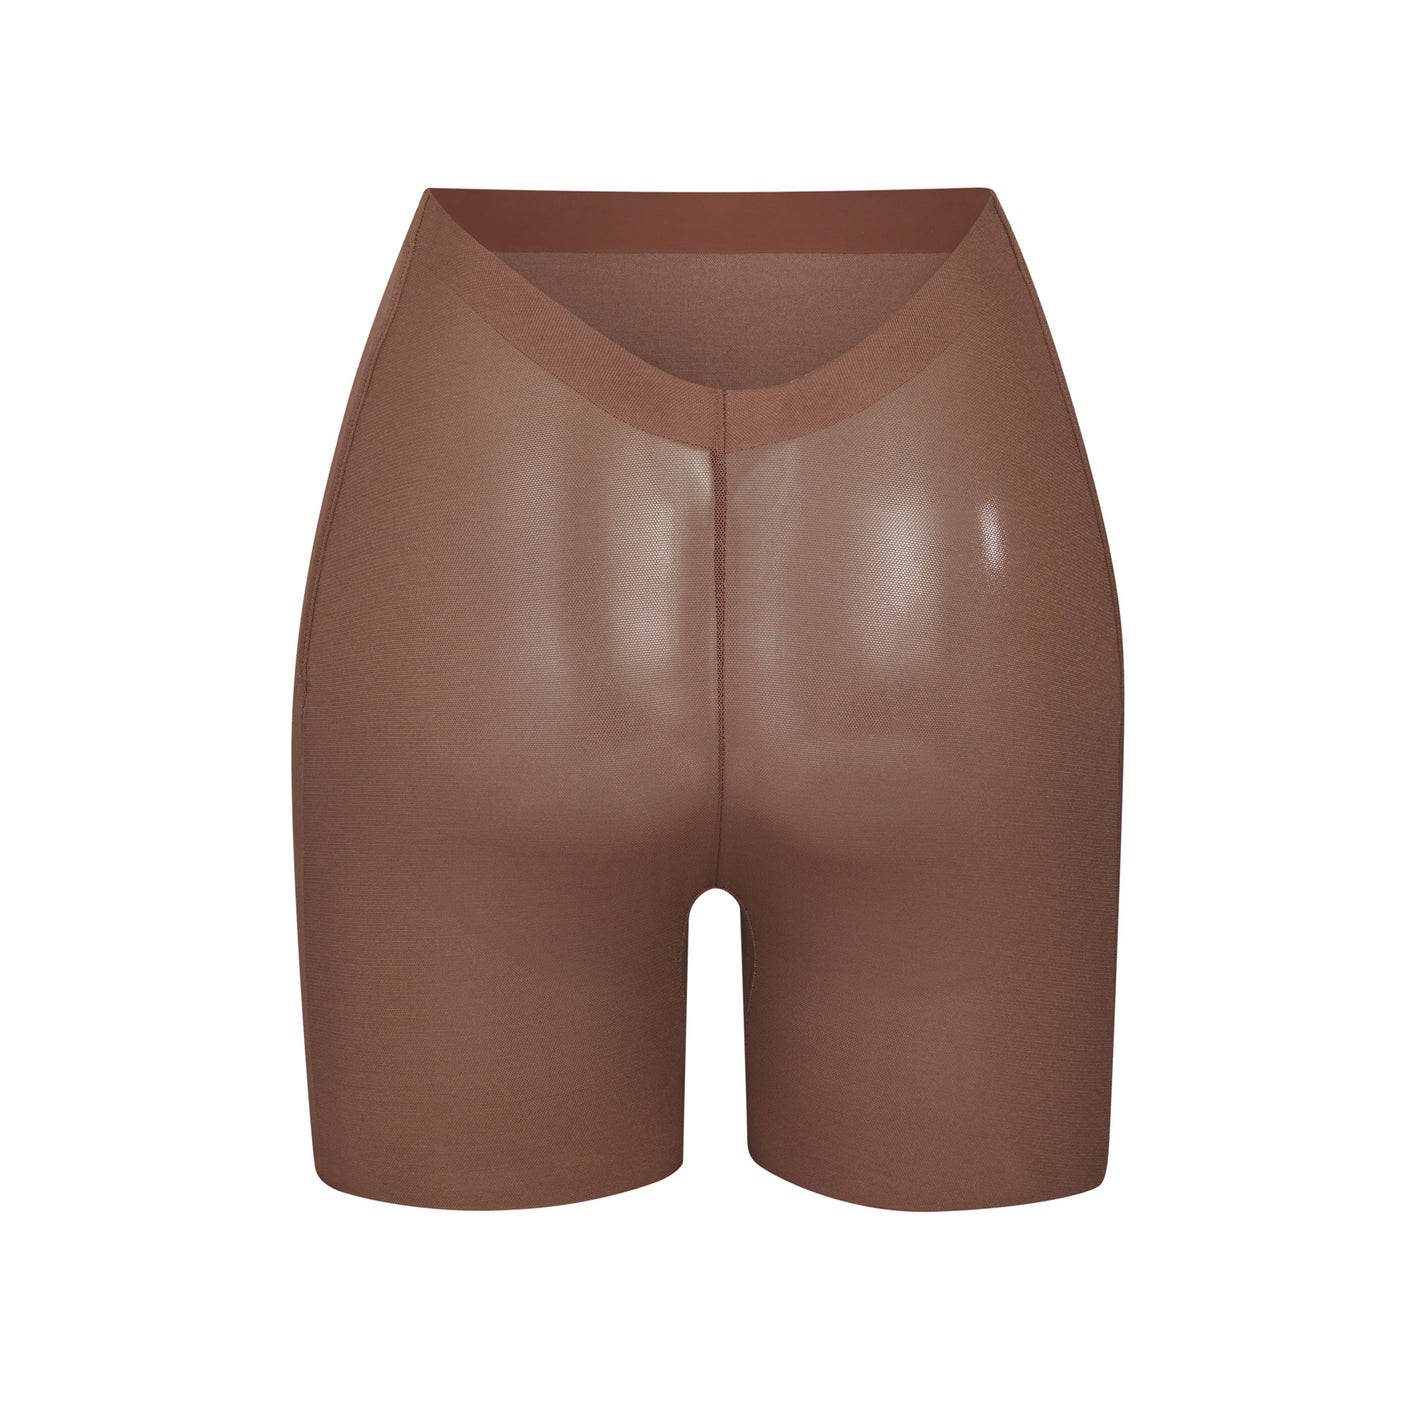 SKIMS Sheer Sculpt Low Back Short in Clay XL - $70 New With Tags - From  Matilda